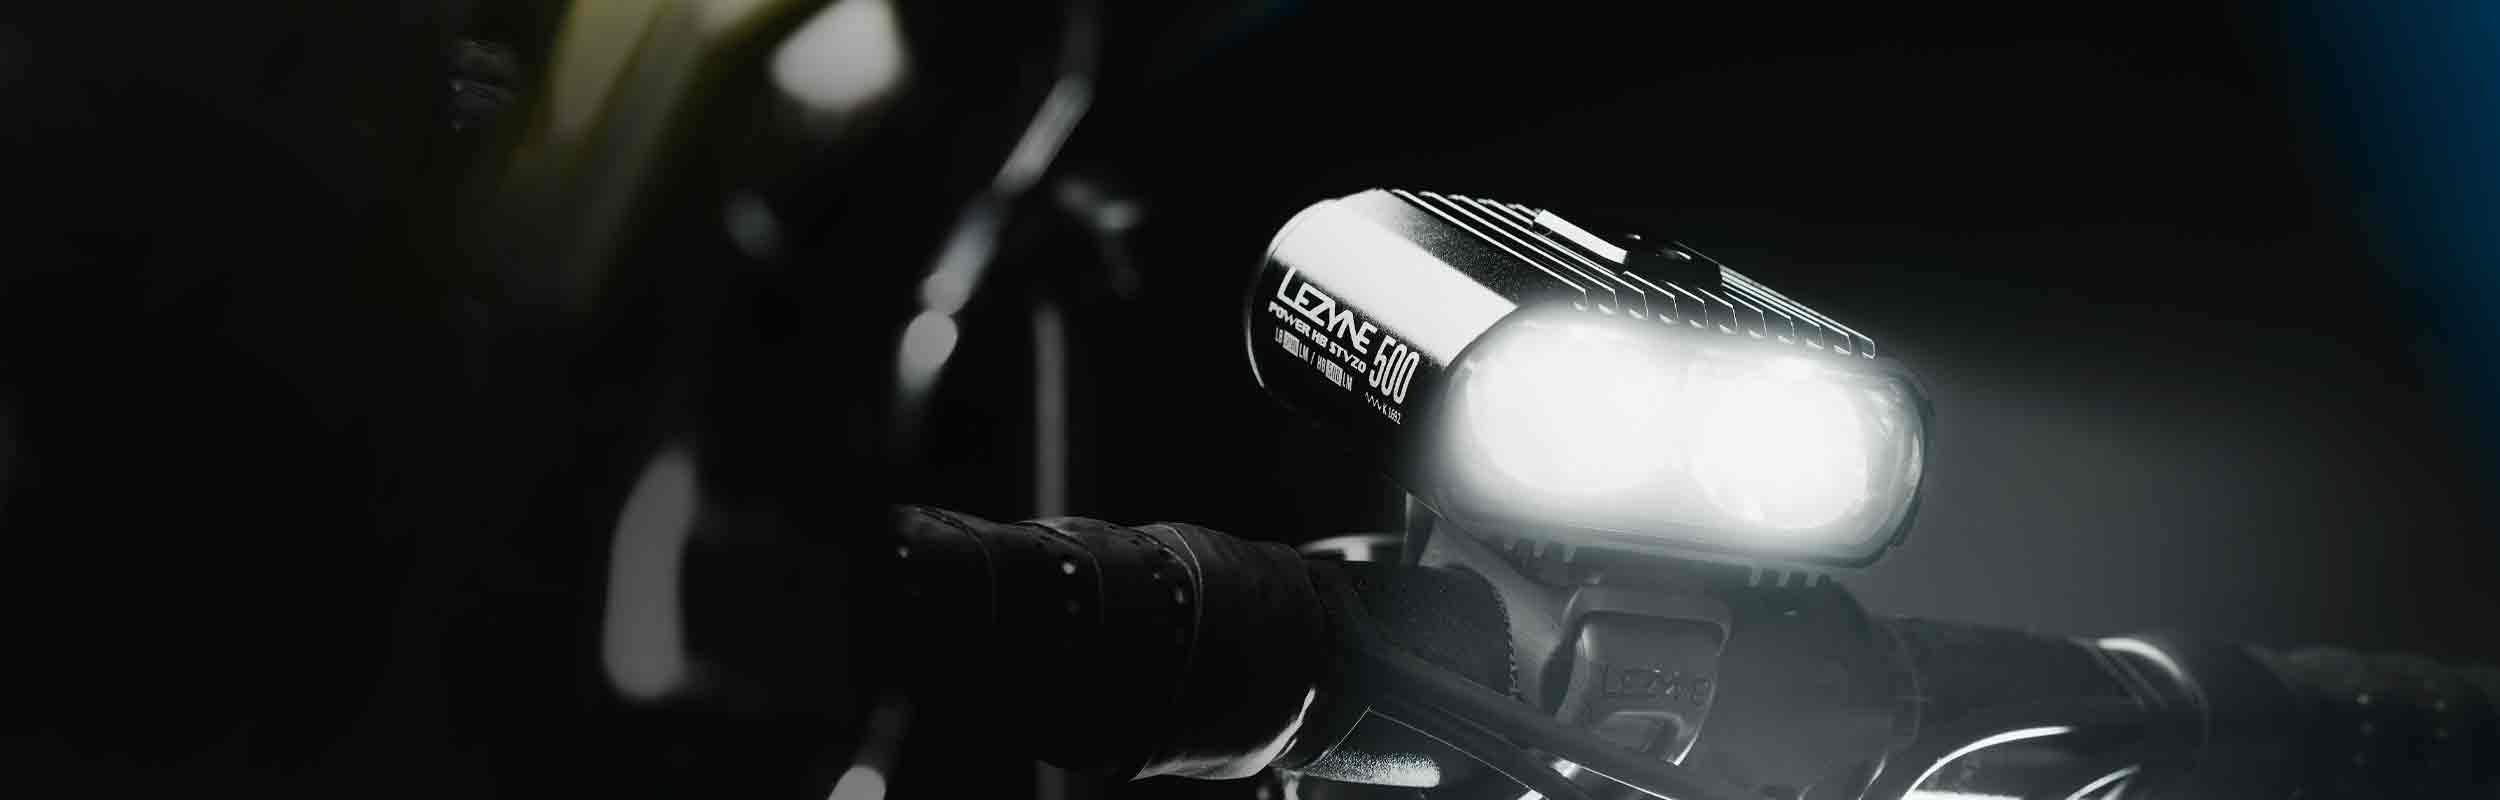 A close up of a bicycle light mounted on handlebars with the words Lezyne Power Pro 500 printed on the side of the light.